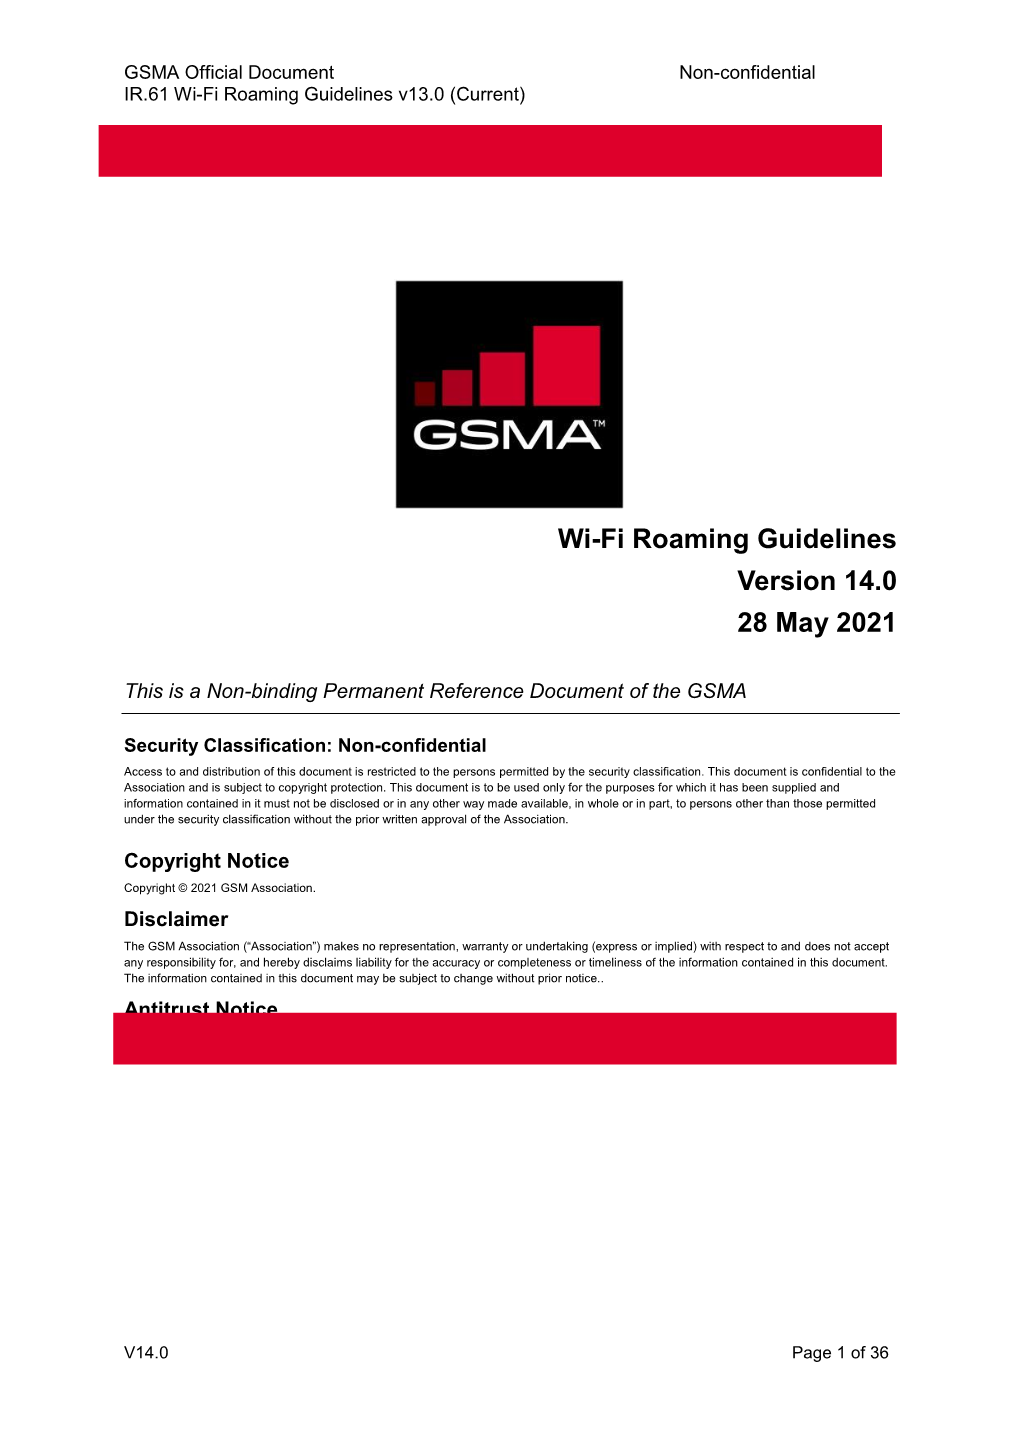 Wi-Fi Roaming Guidelines Version 14.0 28 May 2021